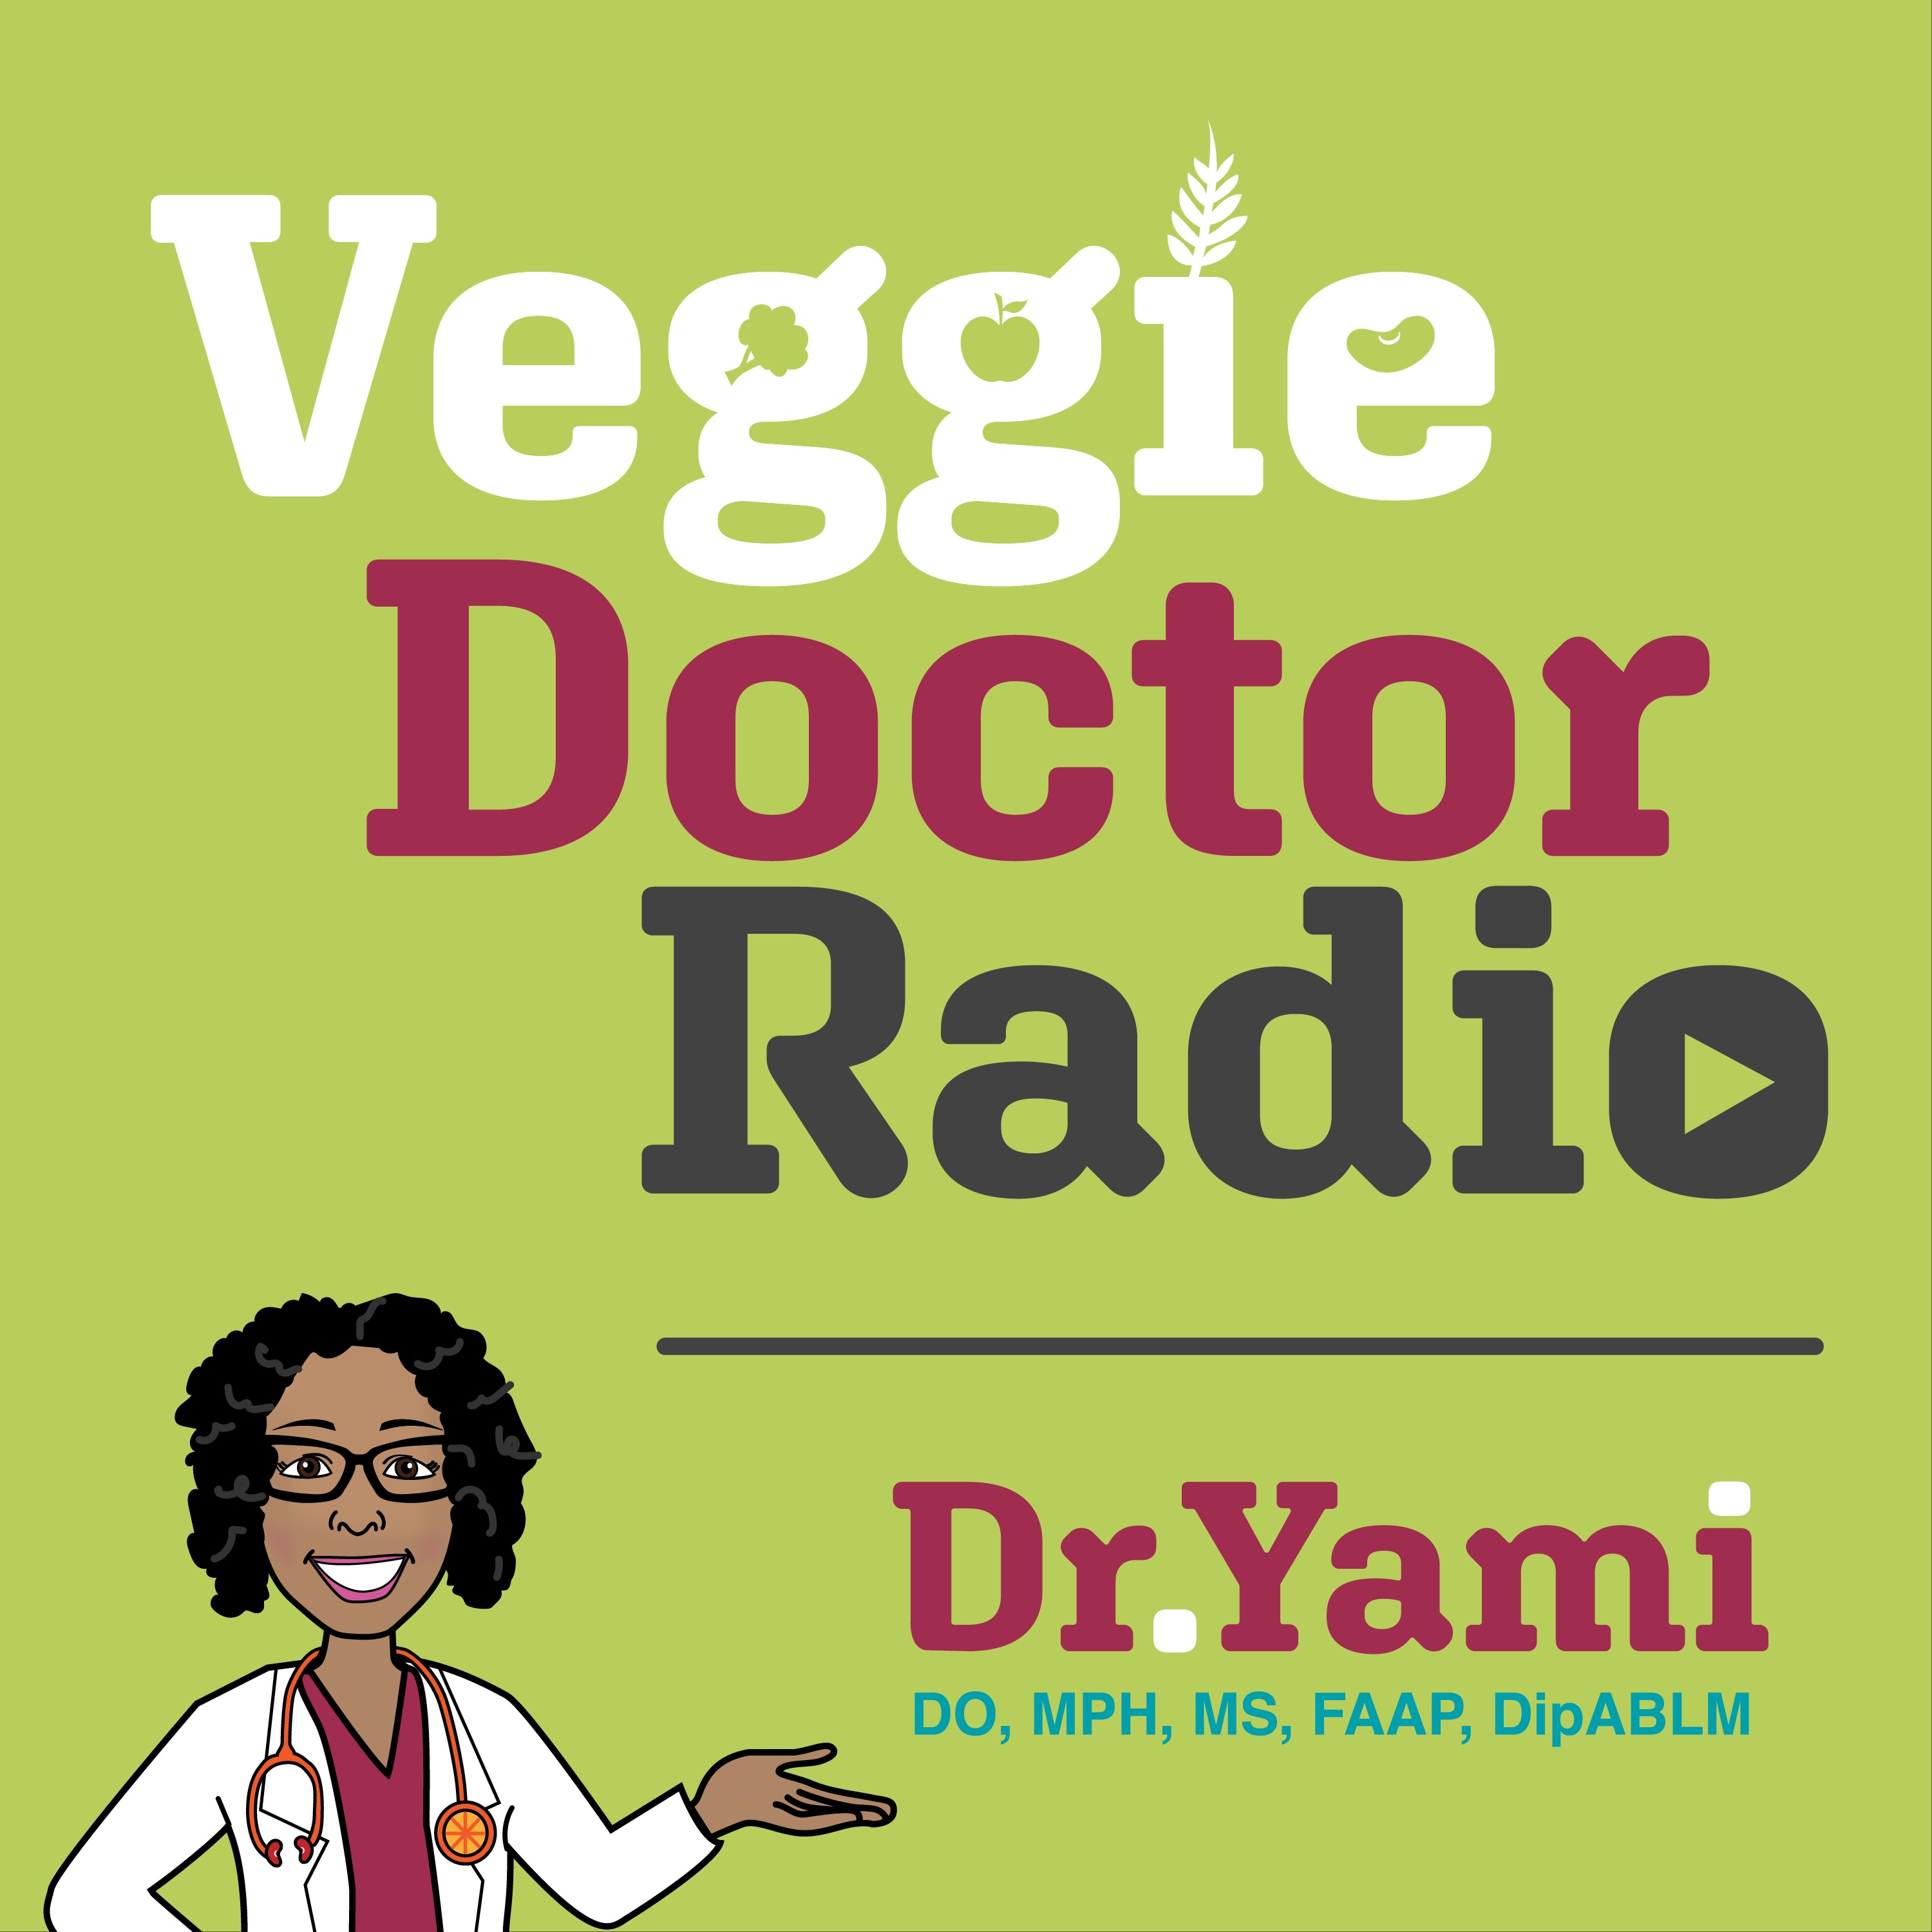 215: The Power of the Consumer: How Your Choices Can Reduce Animal Suffering with Mercy For Animals (Veggie Doctor Radio)